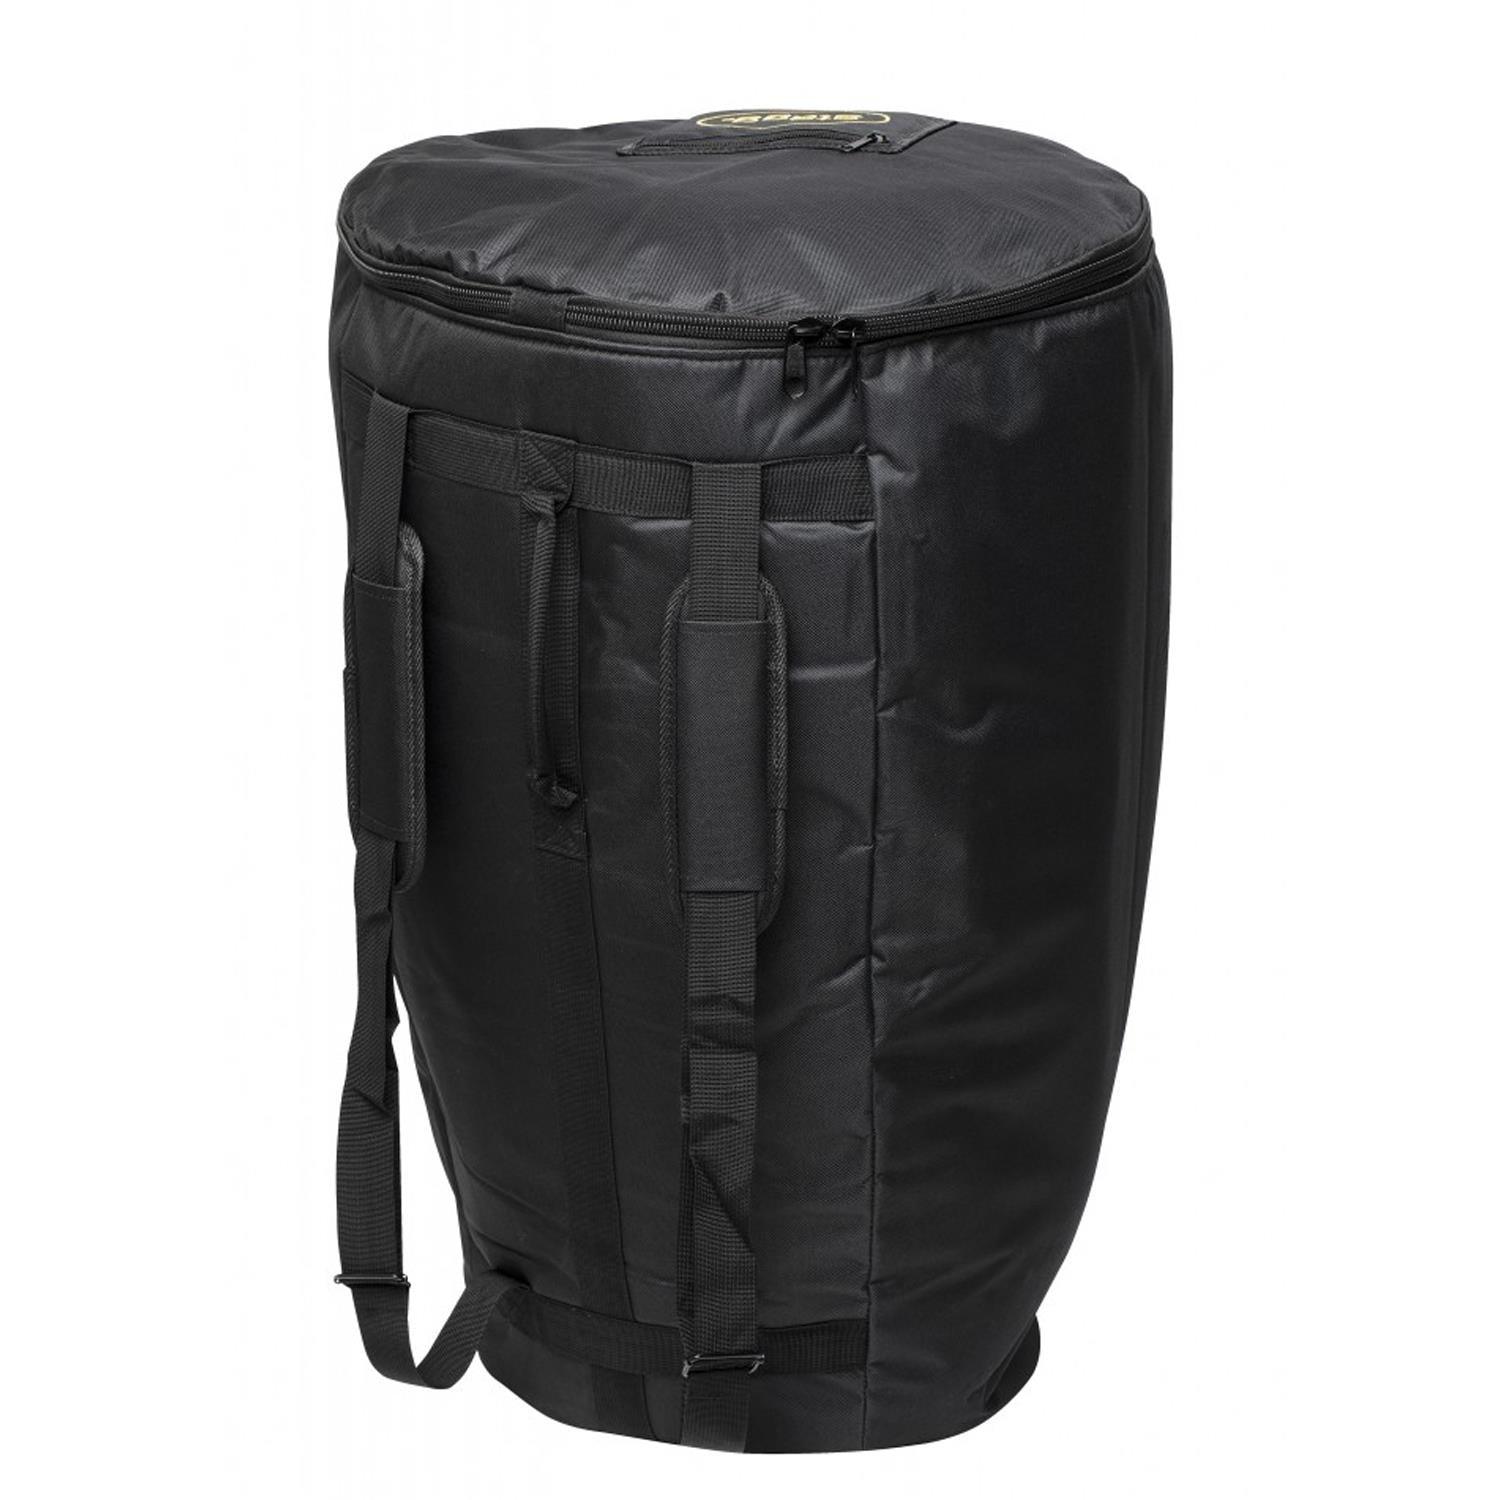 Stagg CGB-12 BK 12" Conga Carry Bag - DY Pro Audio